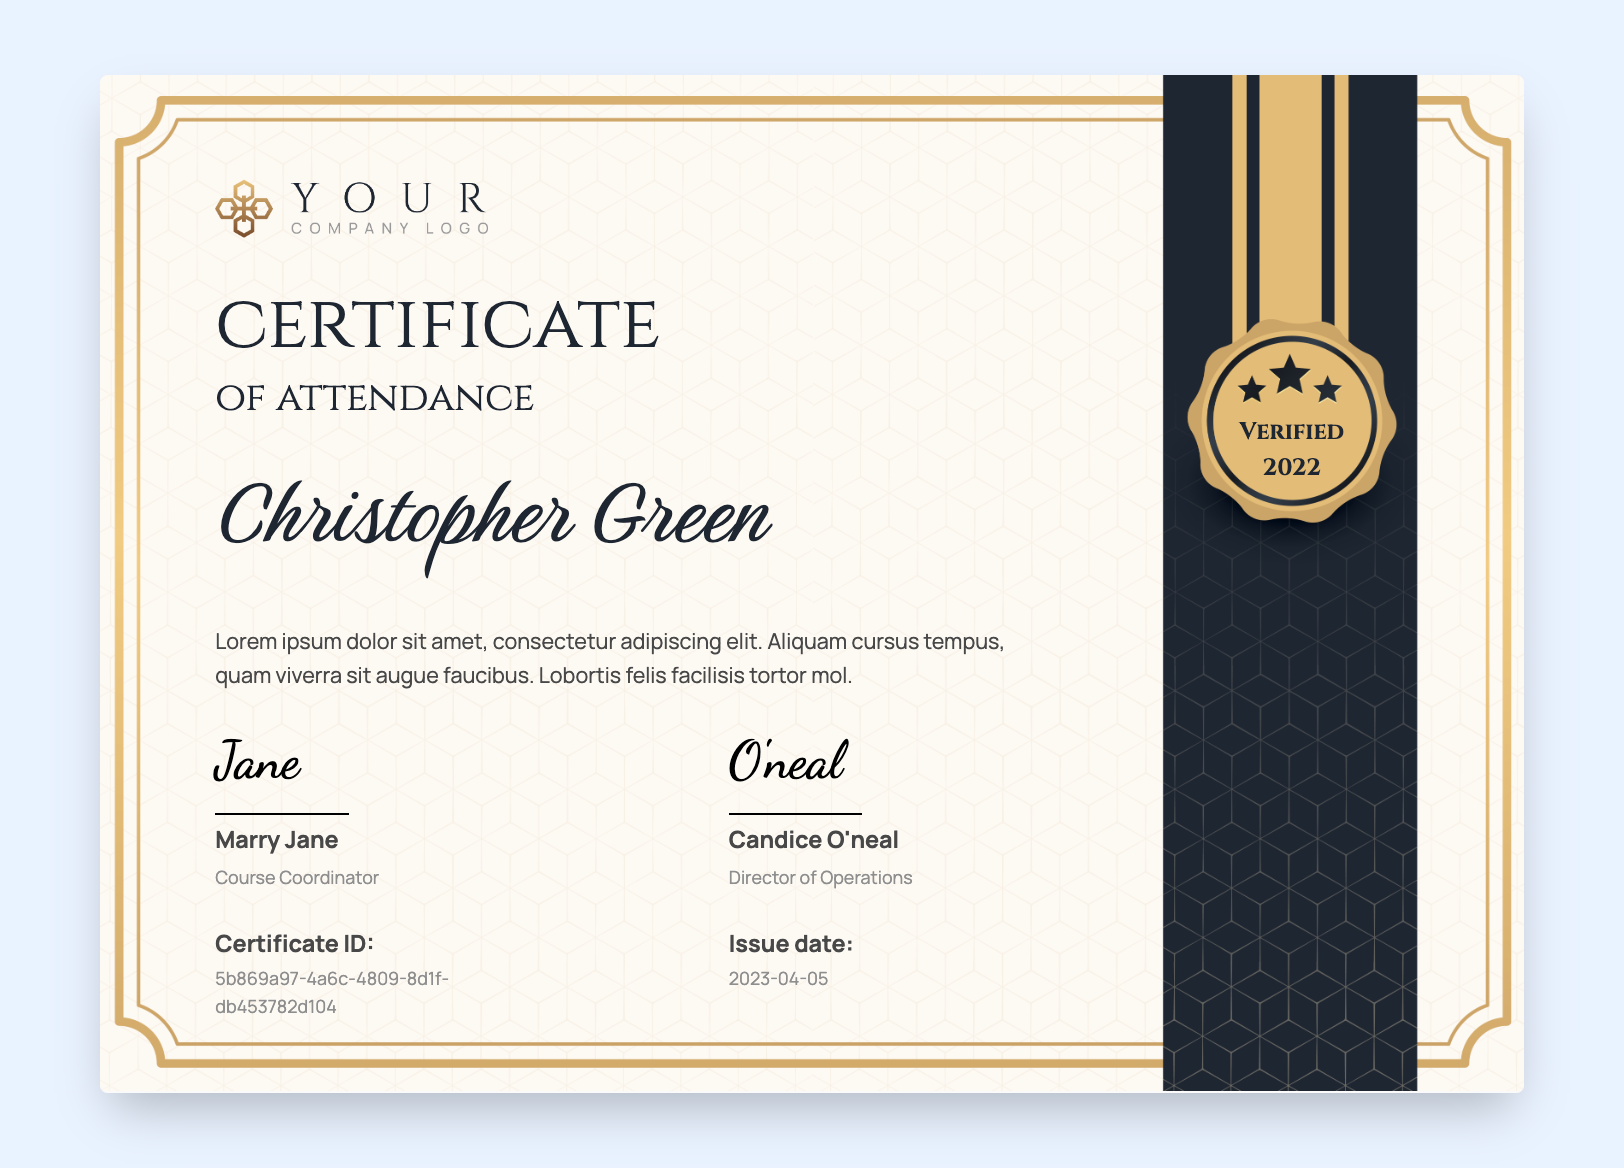 College vibe certificate of attendance.